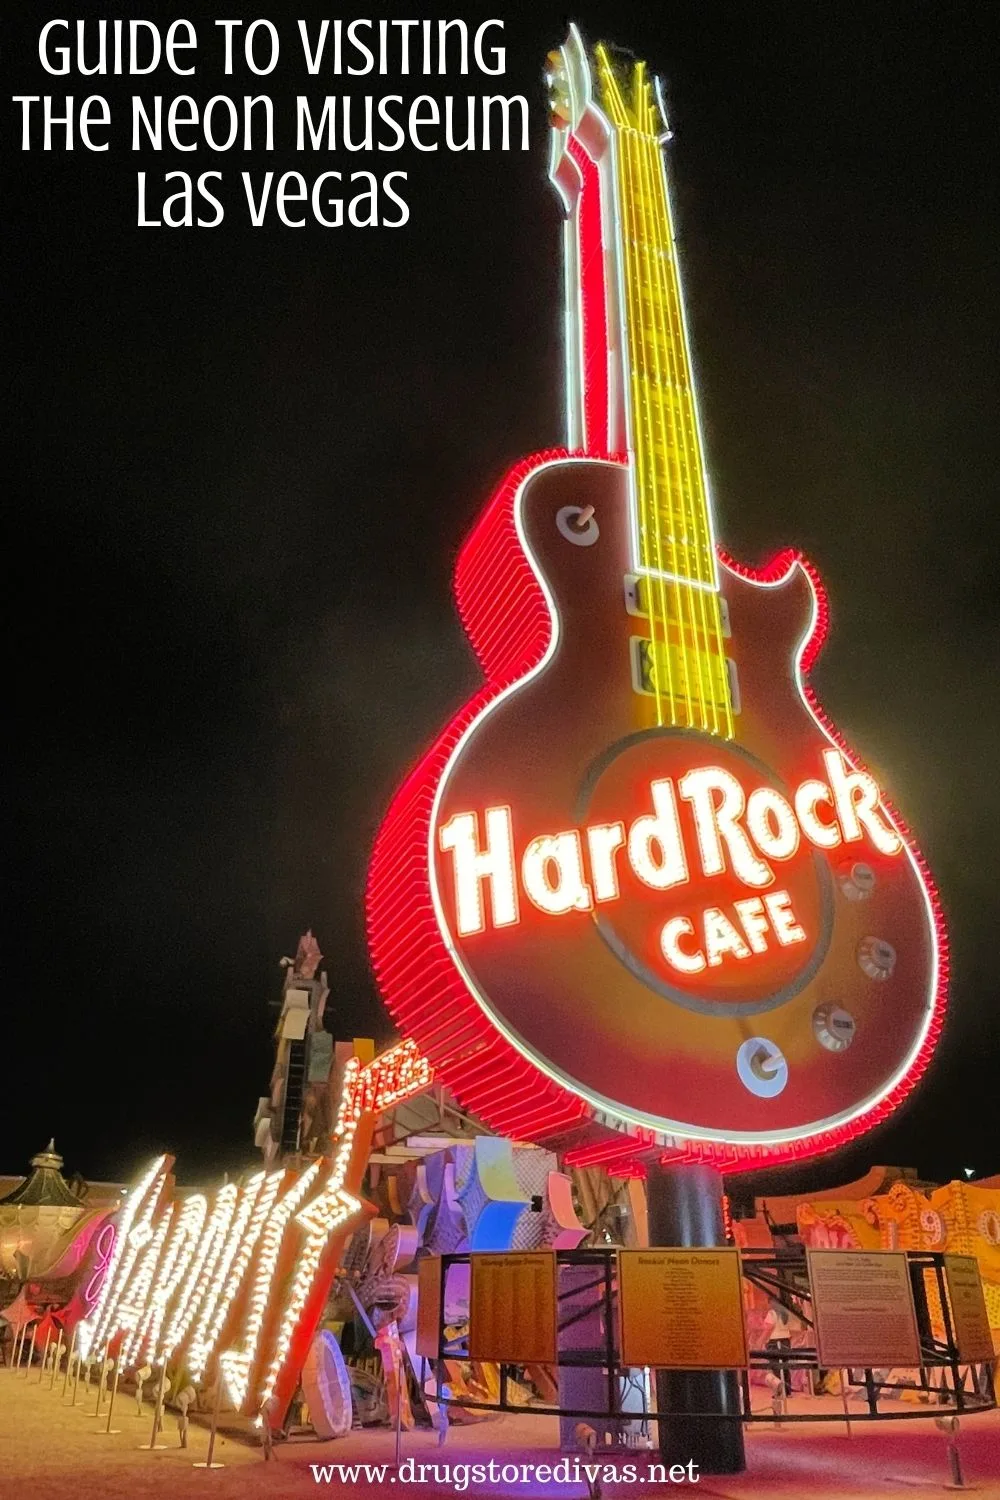 Hard Rock Cafe Las Vegas guitar sign with the words 